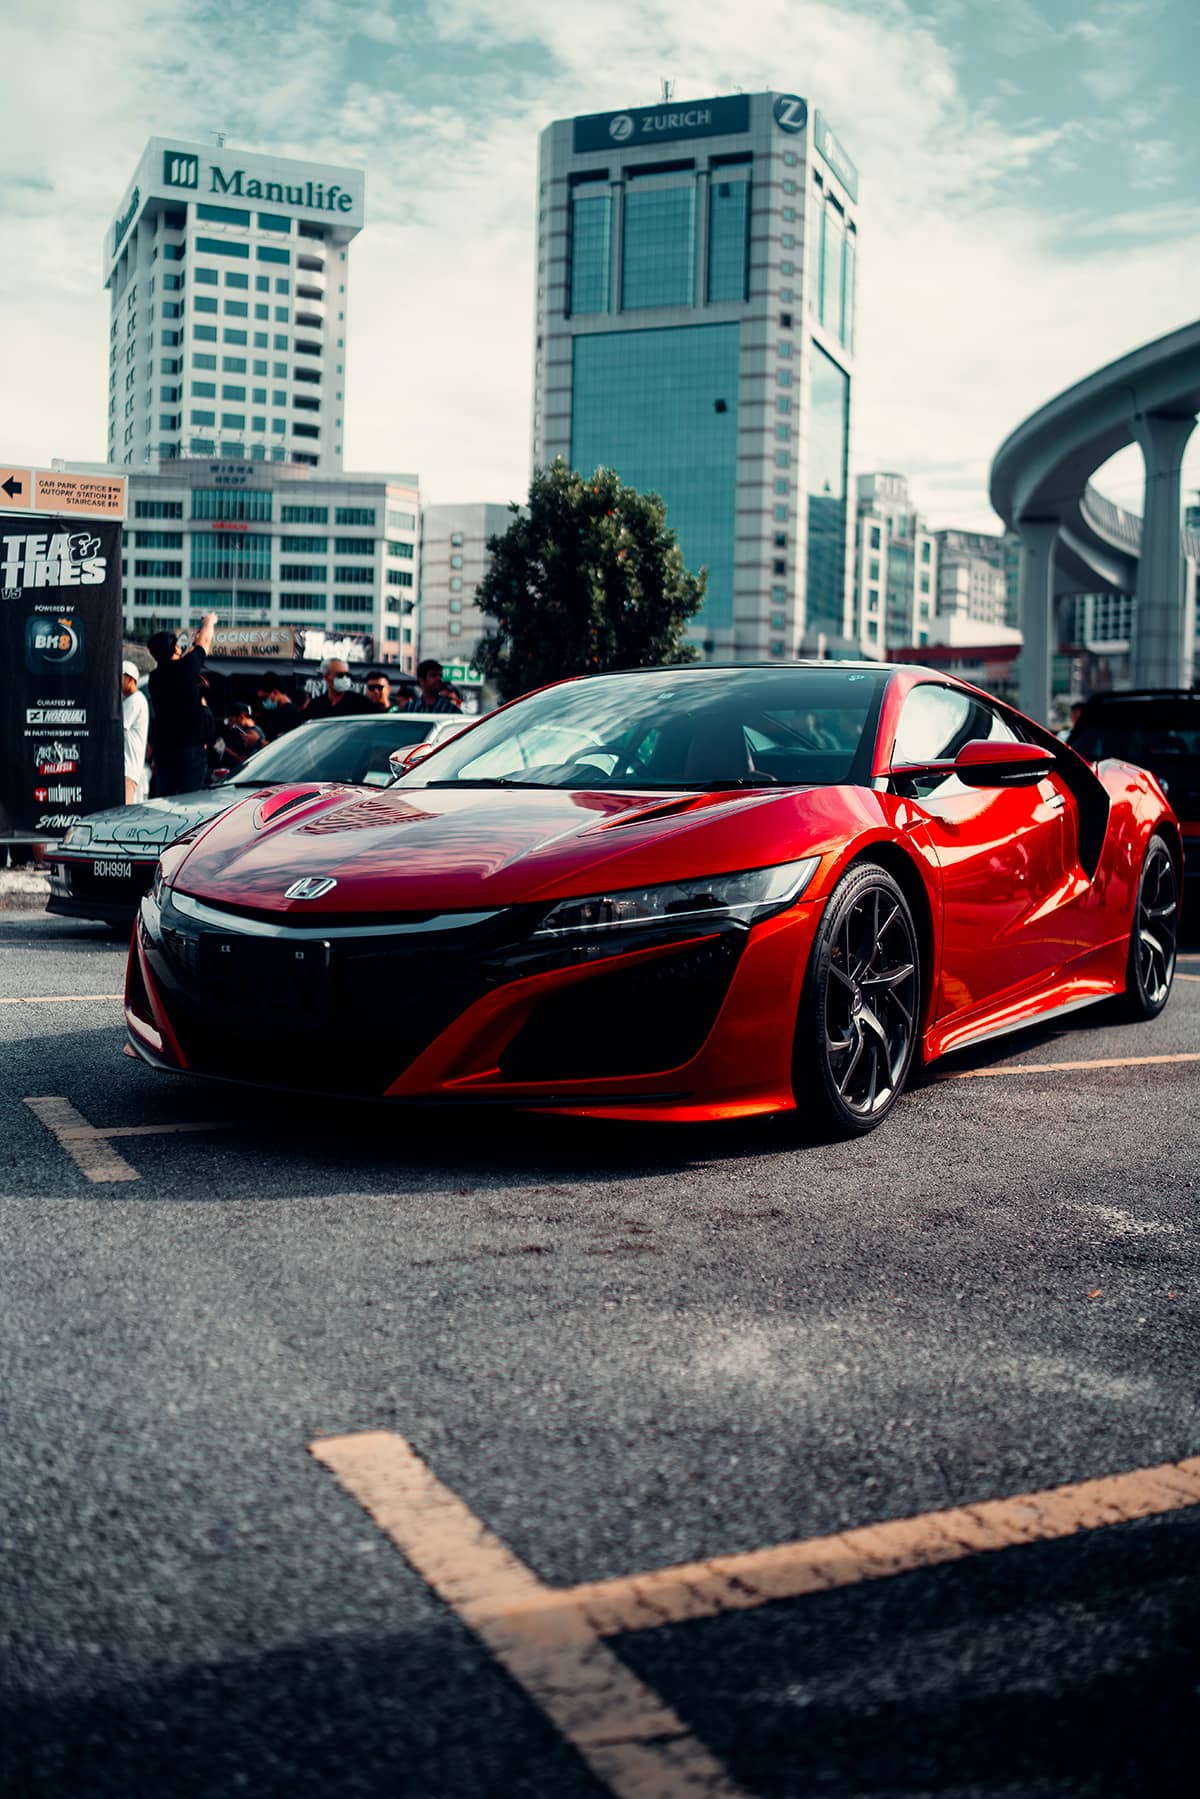 New Generation Honda NSX in red Color